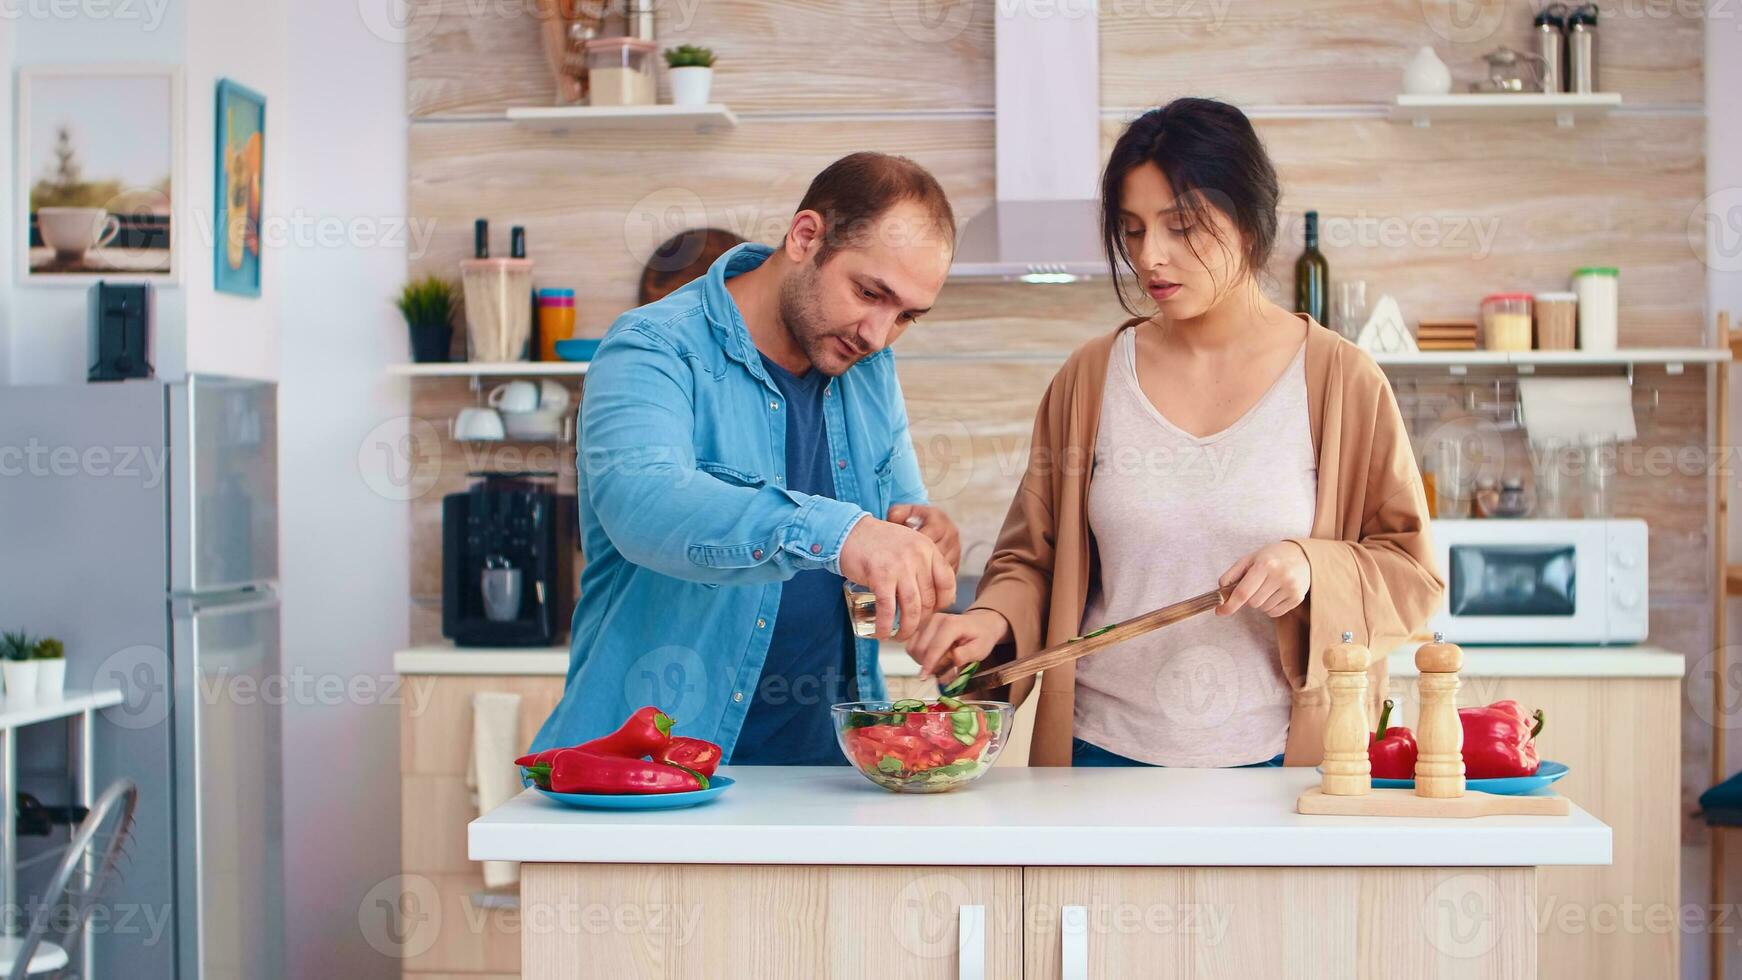 Married couple preparing salad with fresh vegetables in kitchen. Cooking preparing healthy organic food happy together lifestyle. Cheerful meal in family with vegetables photo